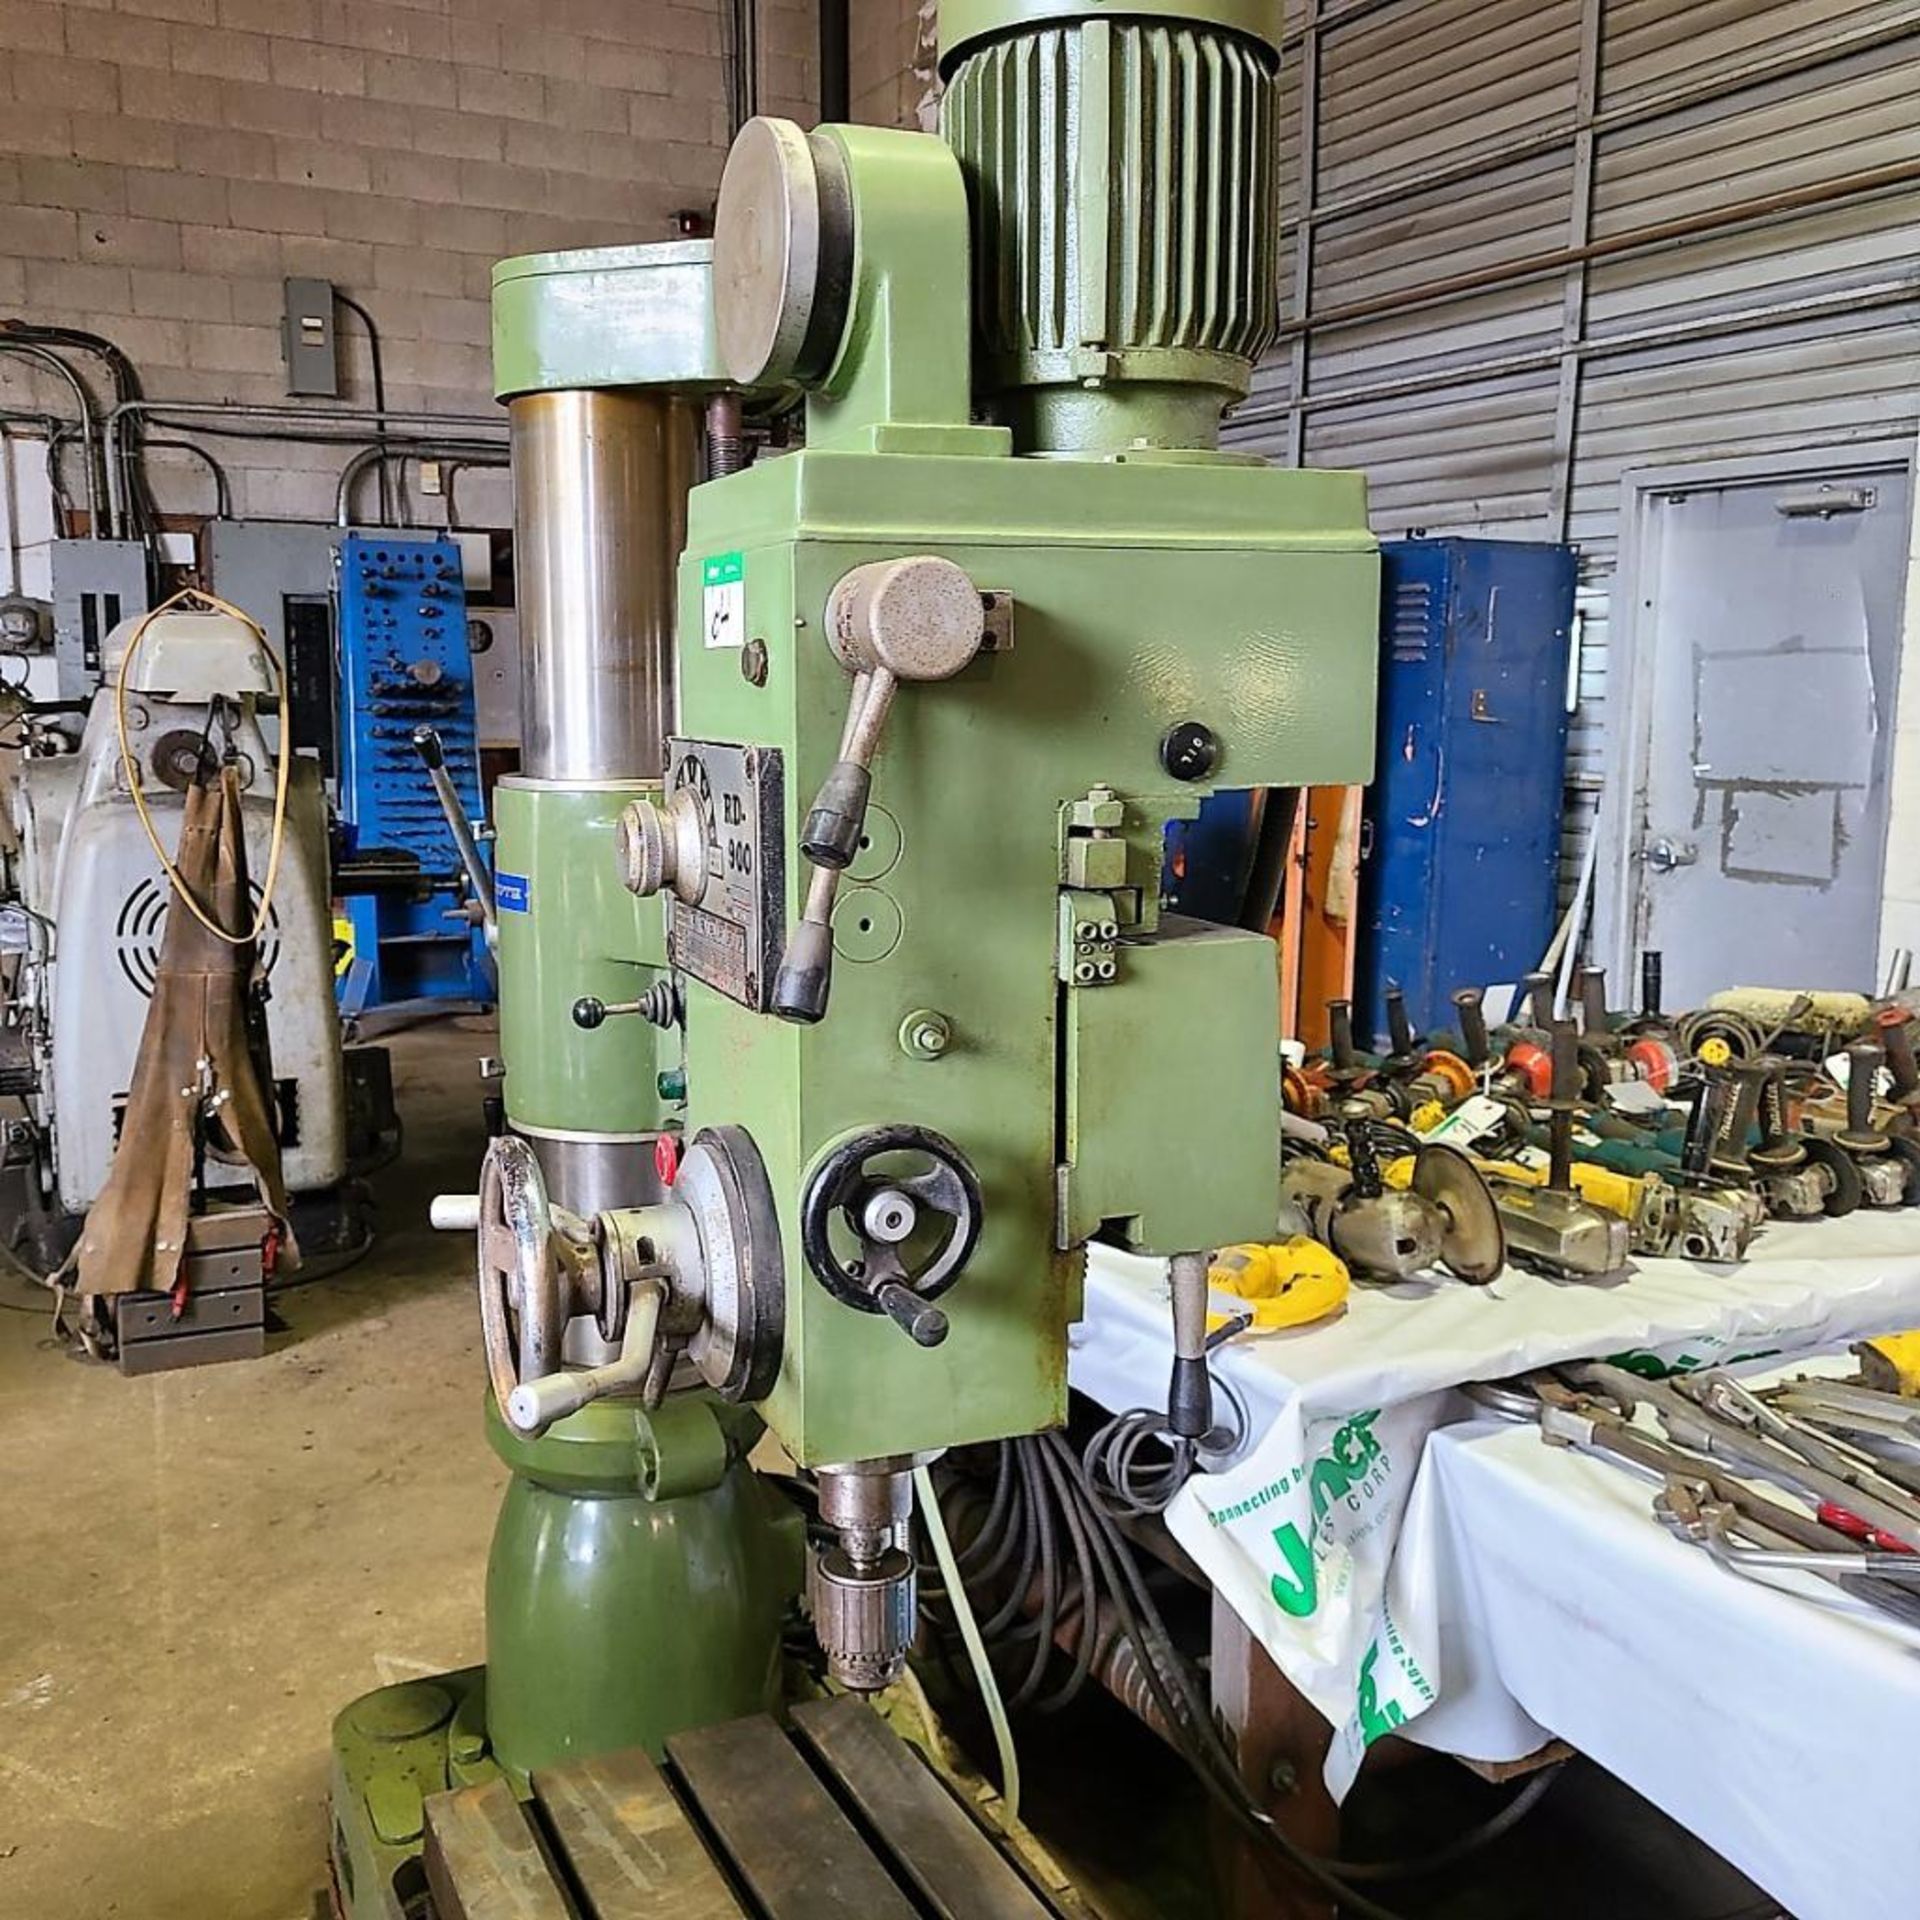 RADIAL DRILL - FREJOTH. MOD. RD900, #3 TAPER, 4' ARM, 10 RUNNING HOURS, 220V/3PH./2HP - Image 3 of 5